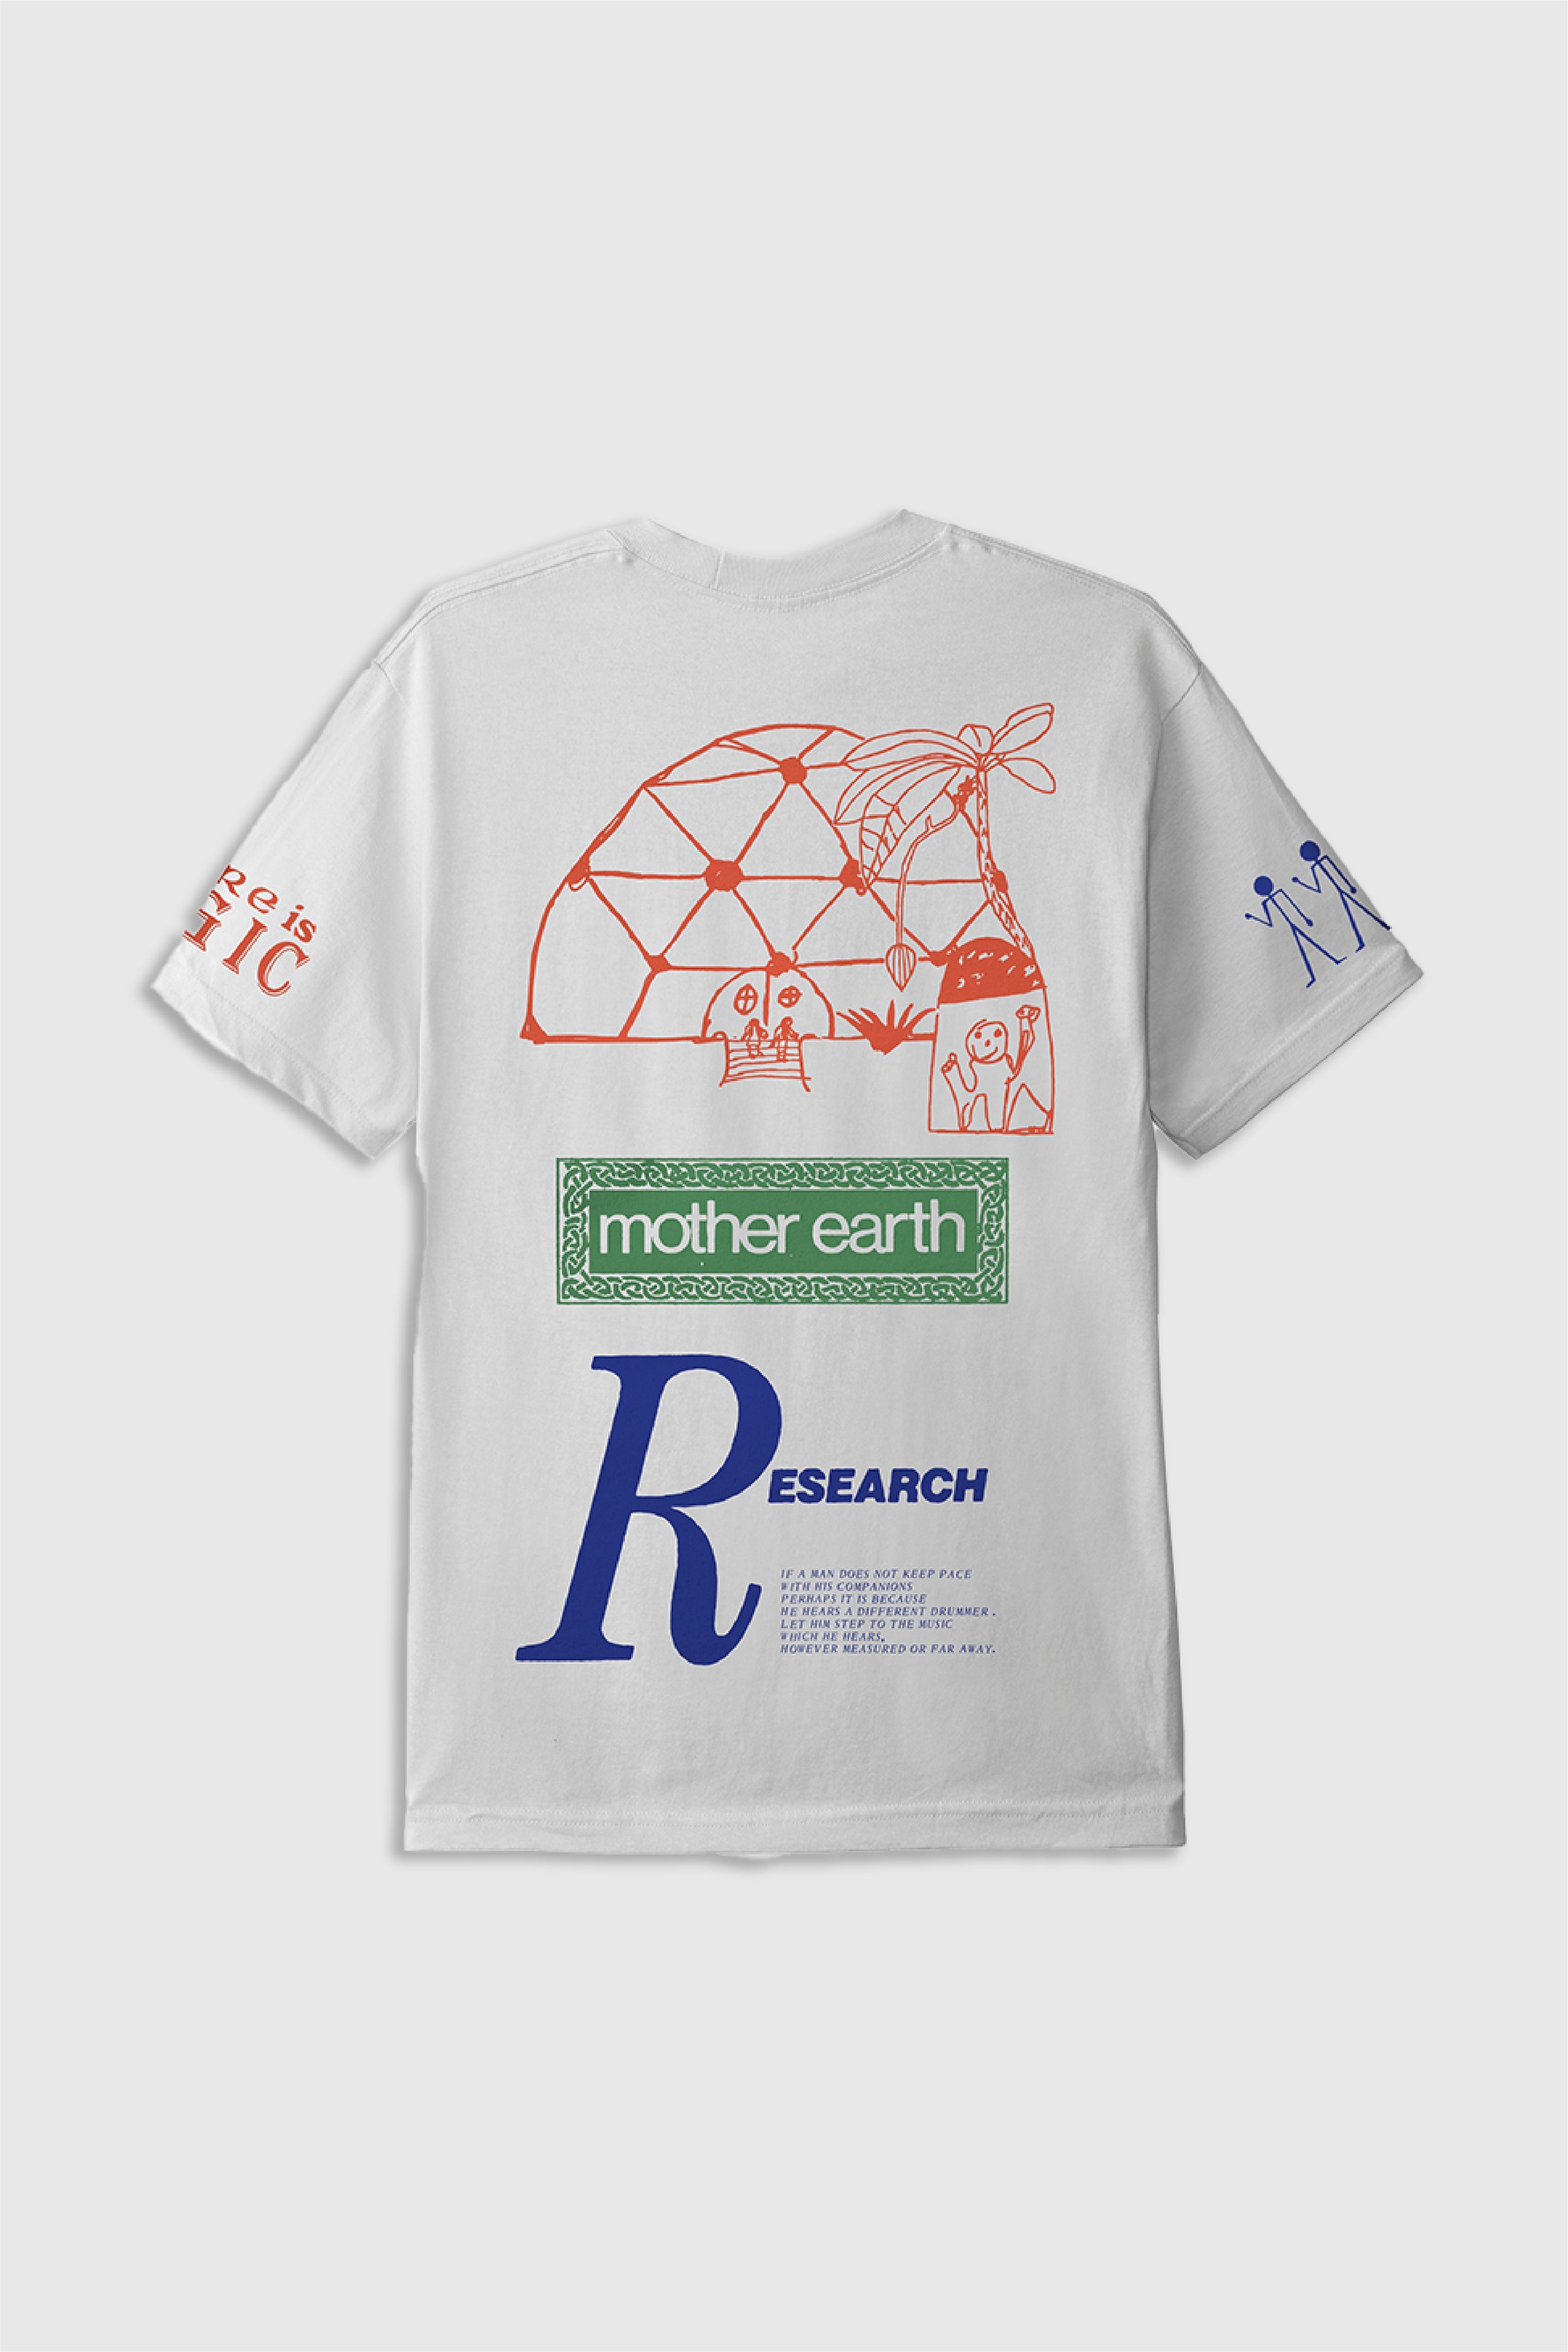 Selectshop FRAME - LO-FI Mother Earth All Over Print Tee T-Shirts Concept Store Dubai